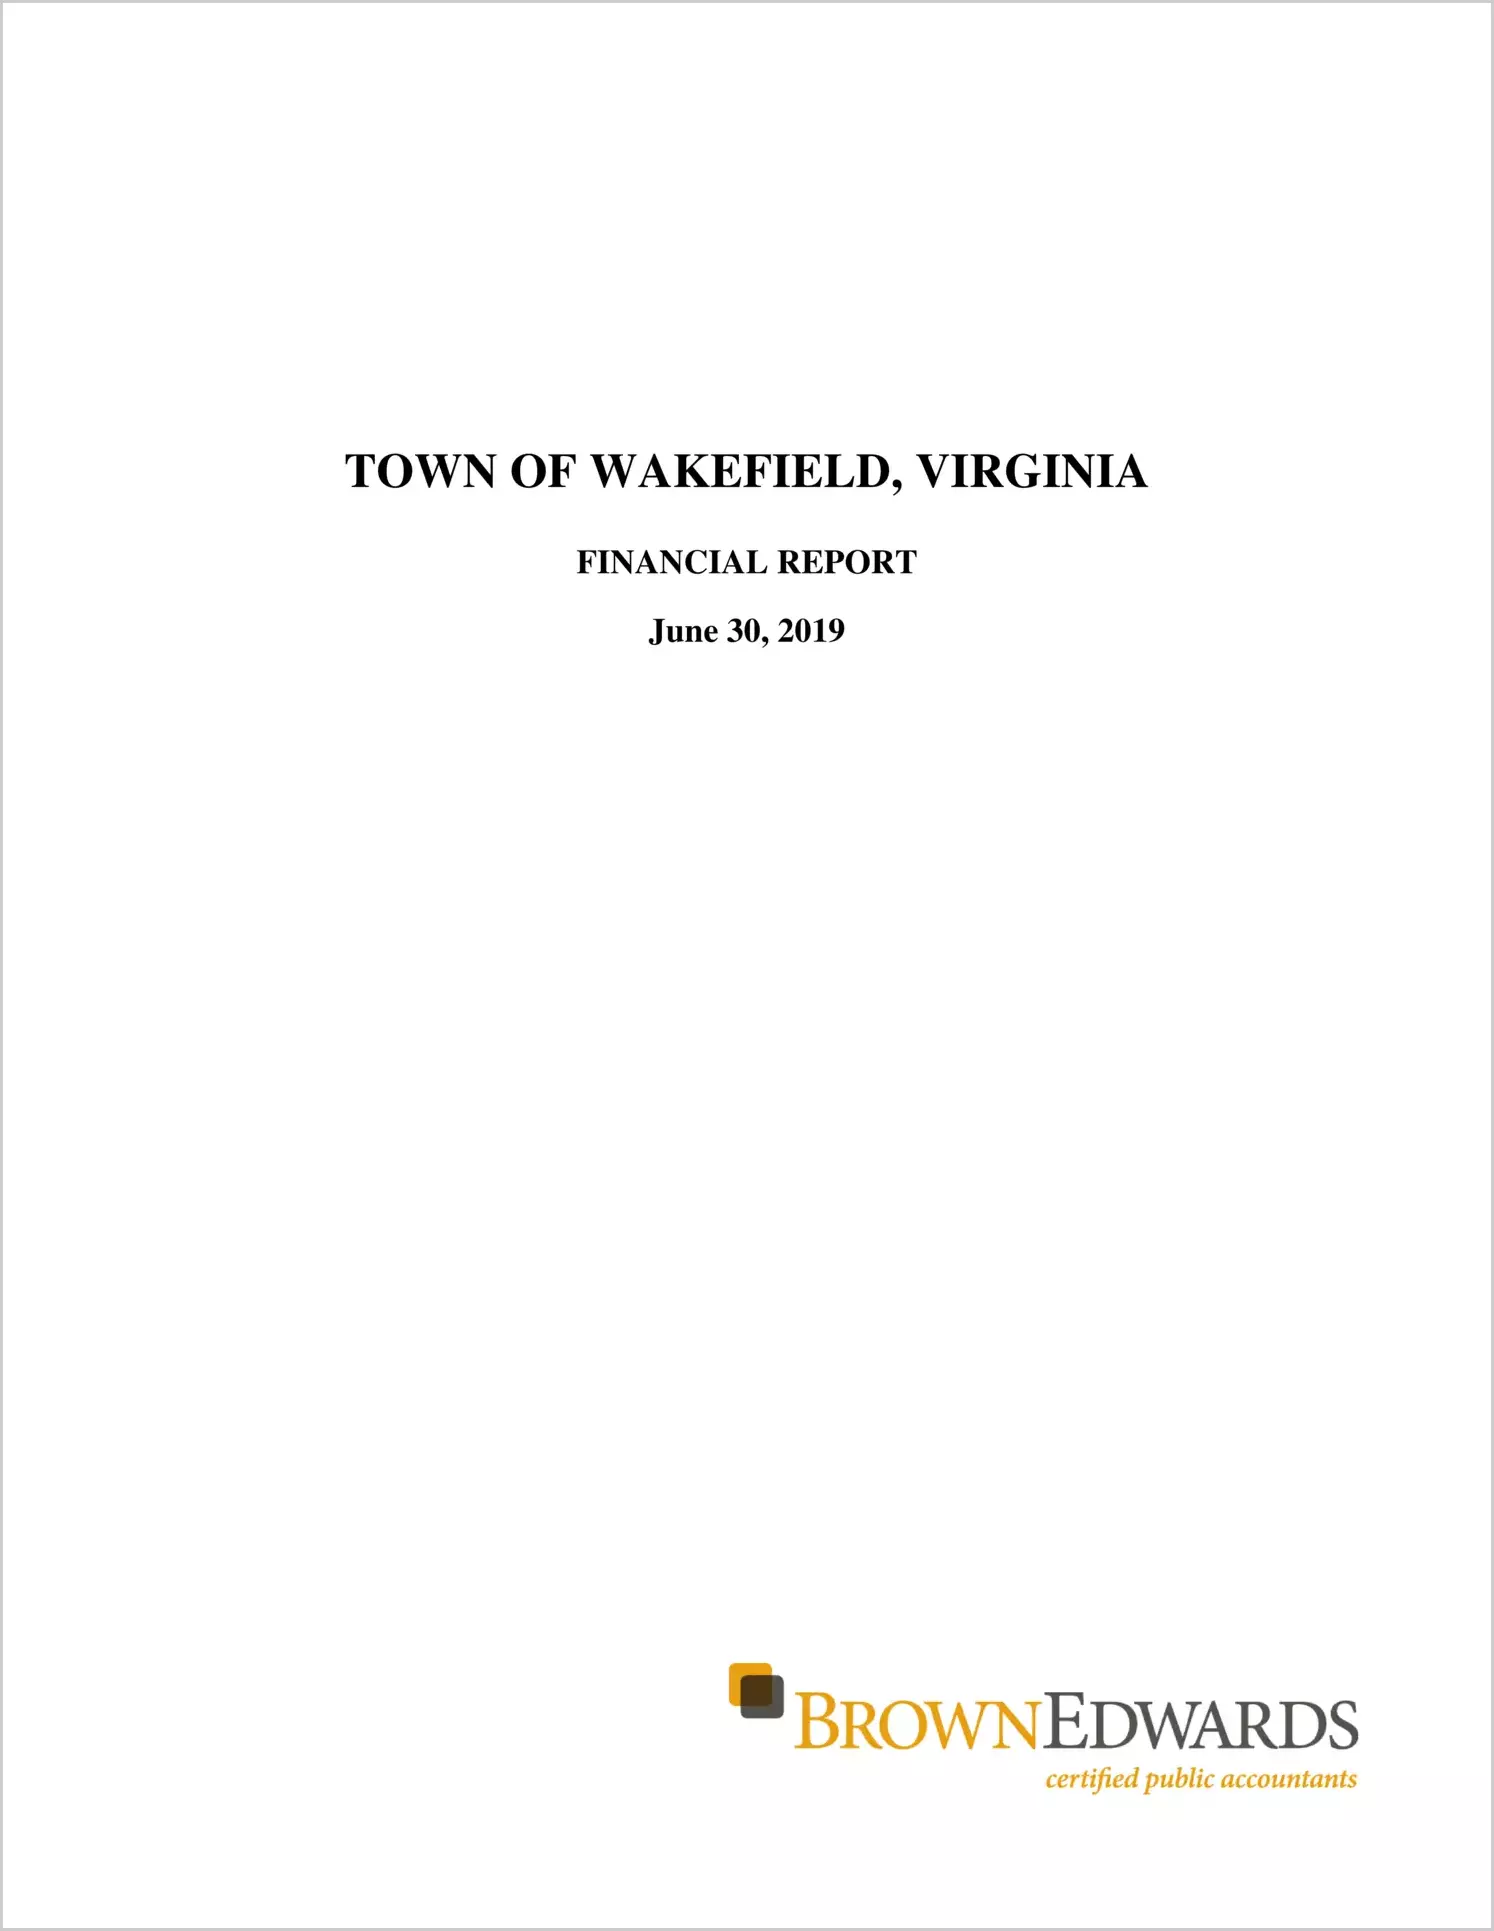 2019 Annual Financial Report for Town of Wakefield